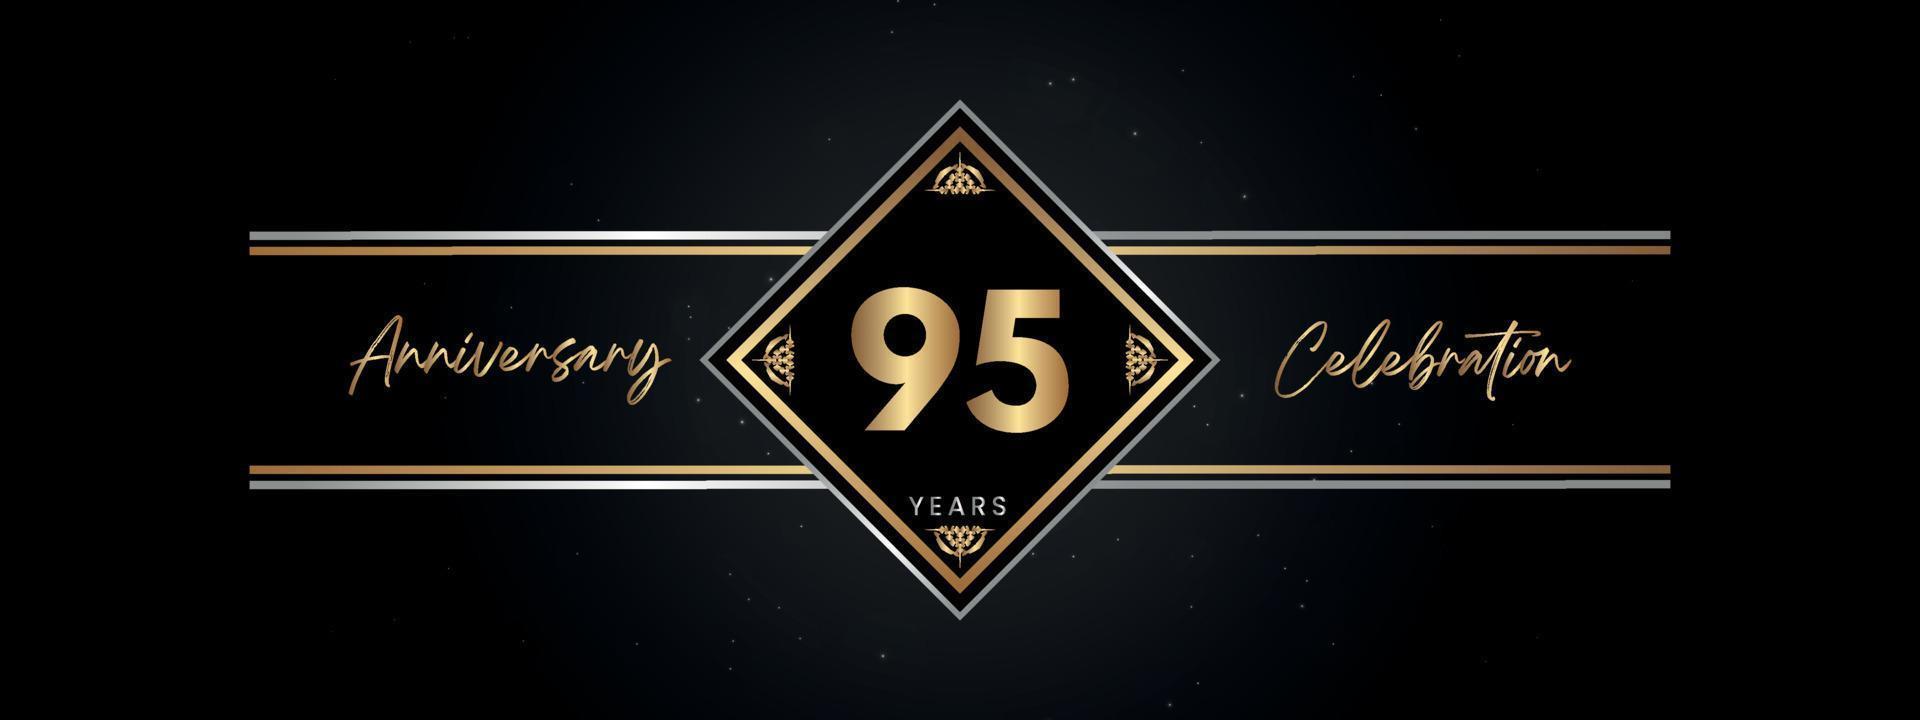 95 years anniversary golden color with decorative frame isolated on black background for anniversary celebration event, birthday party, brochure, greeting card. 95 Year Anniversary Template Design vector